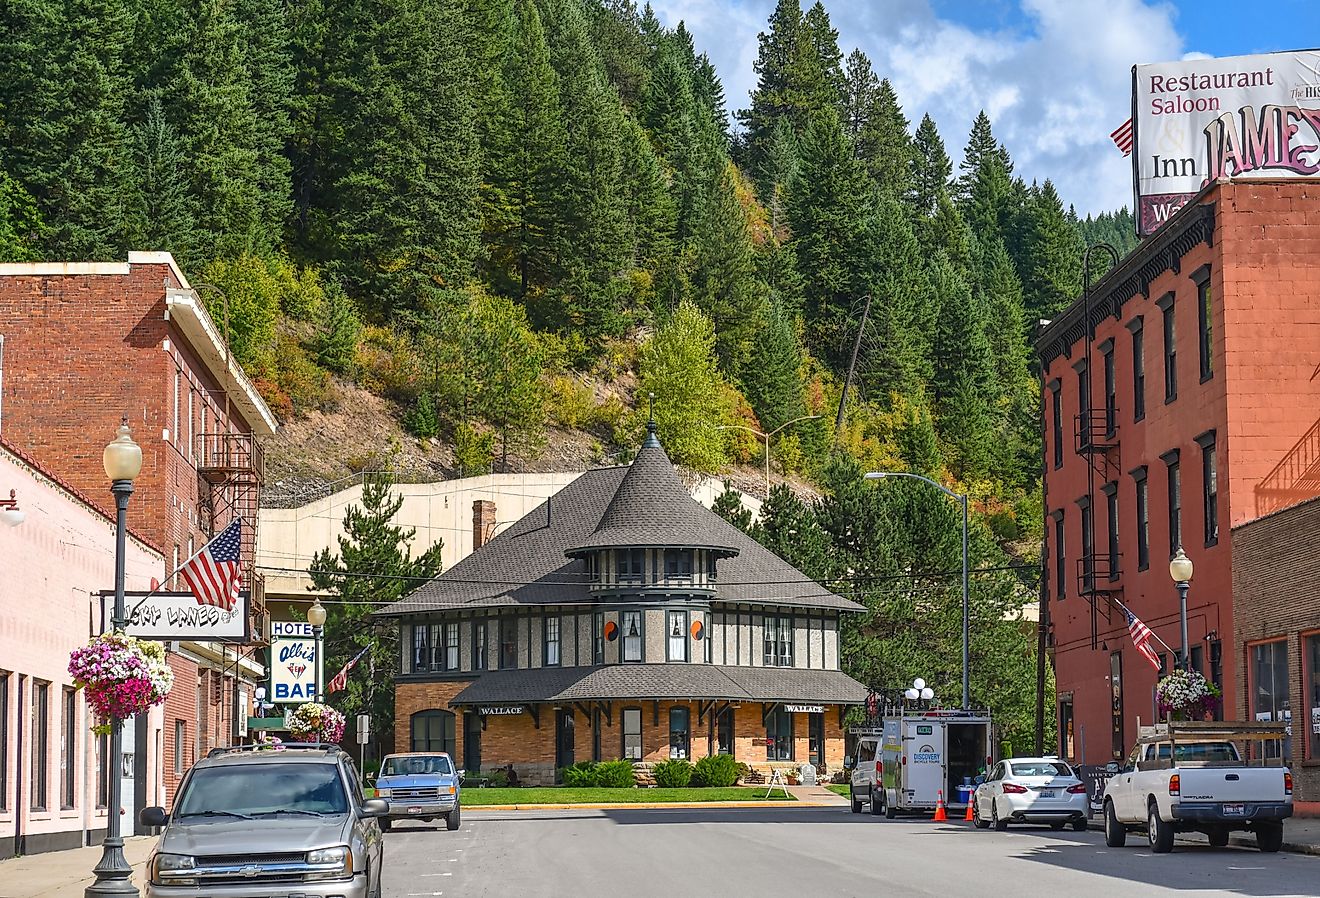 Picturesque Railroad Museum in the Old West mining town of Wallace, Idaho. Image credit Kirk Fisher via Shutterstock.